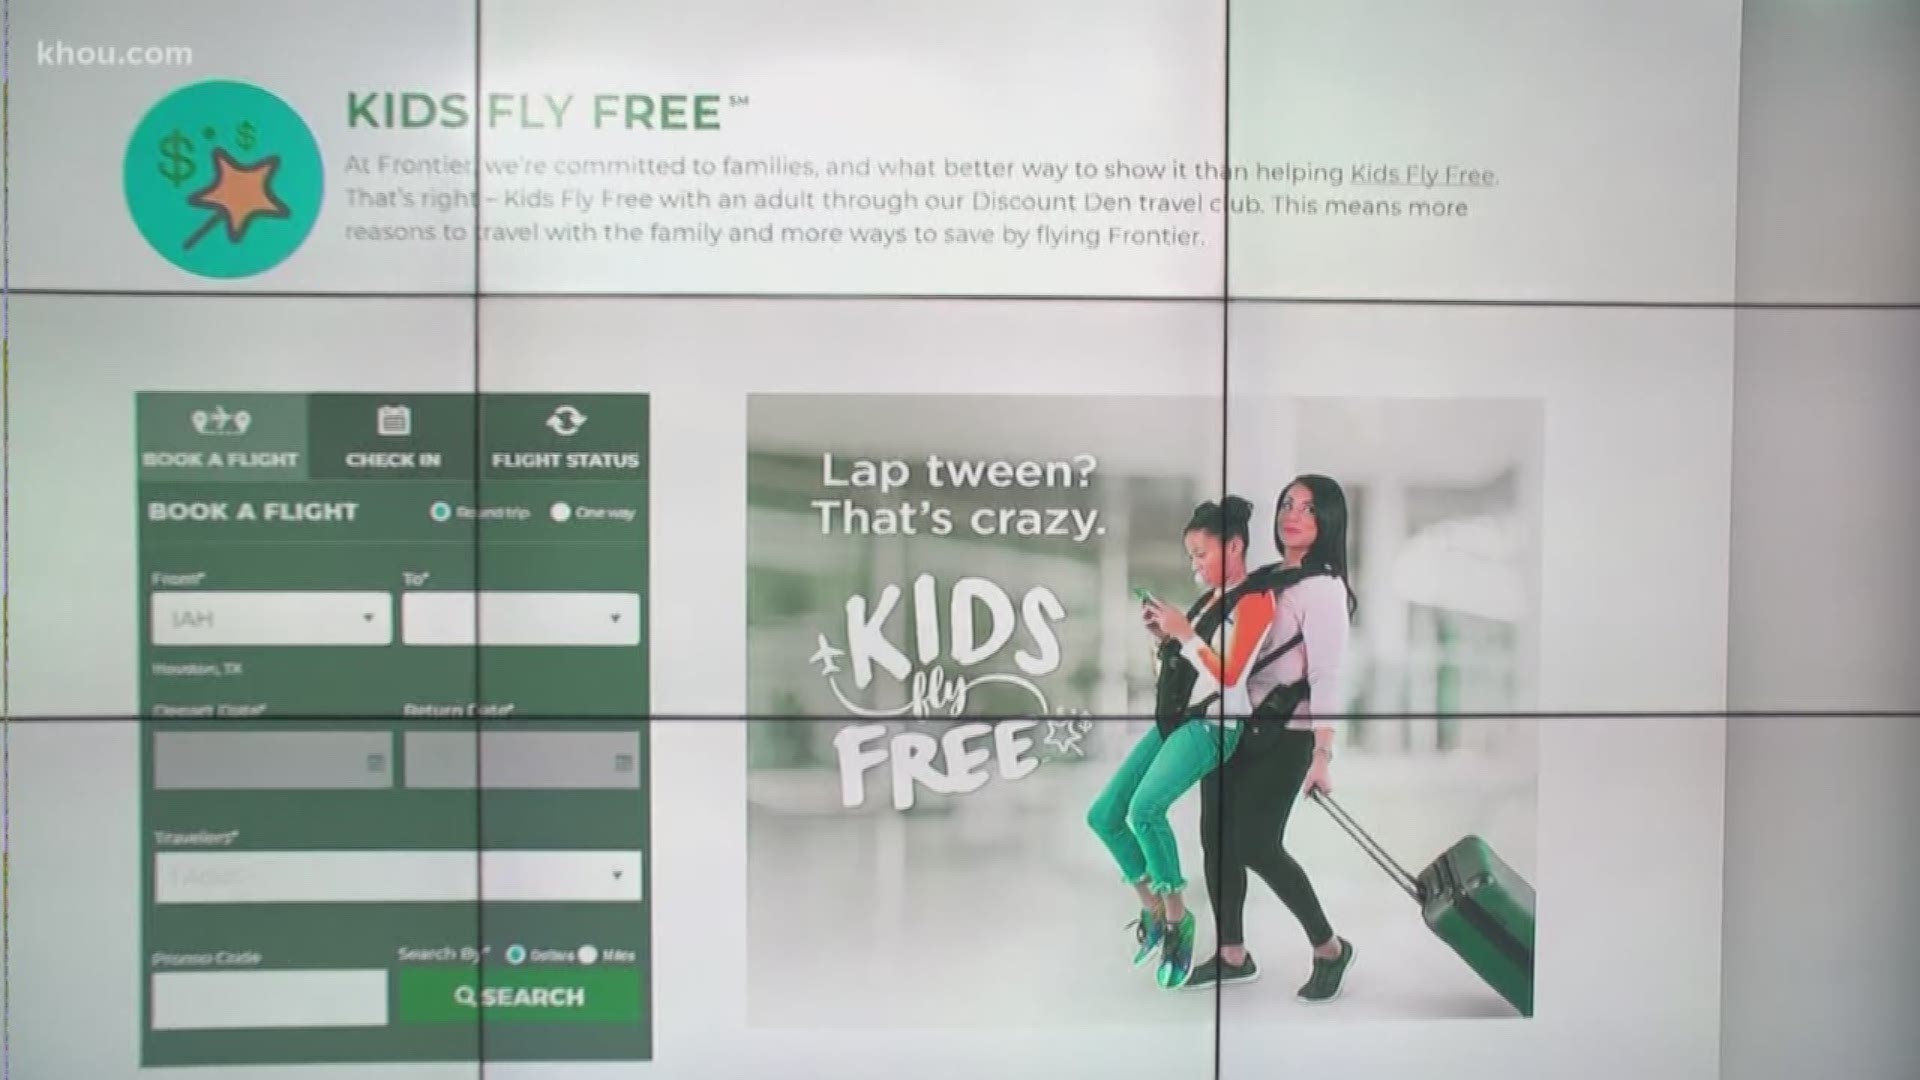 Have you seen the latest headlines? Frontier Airlines is letting kids 14 and under fly for free!